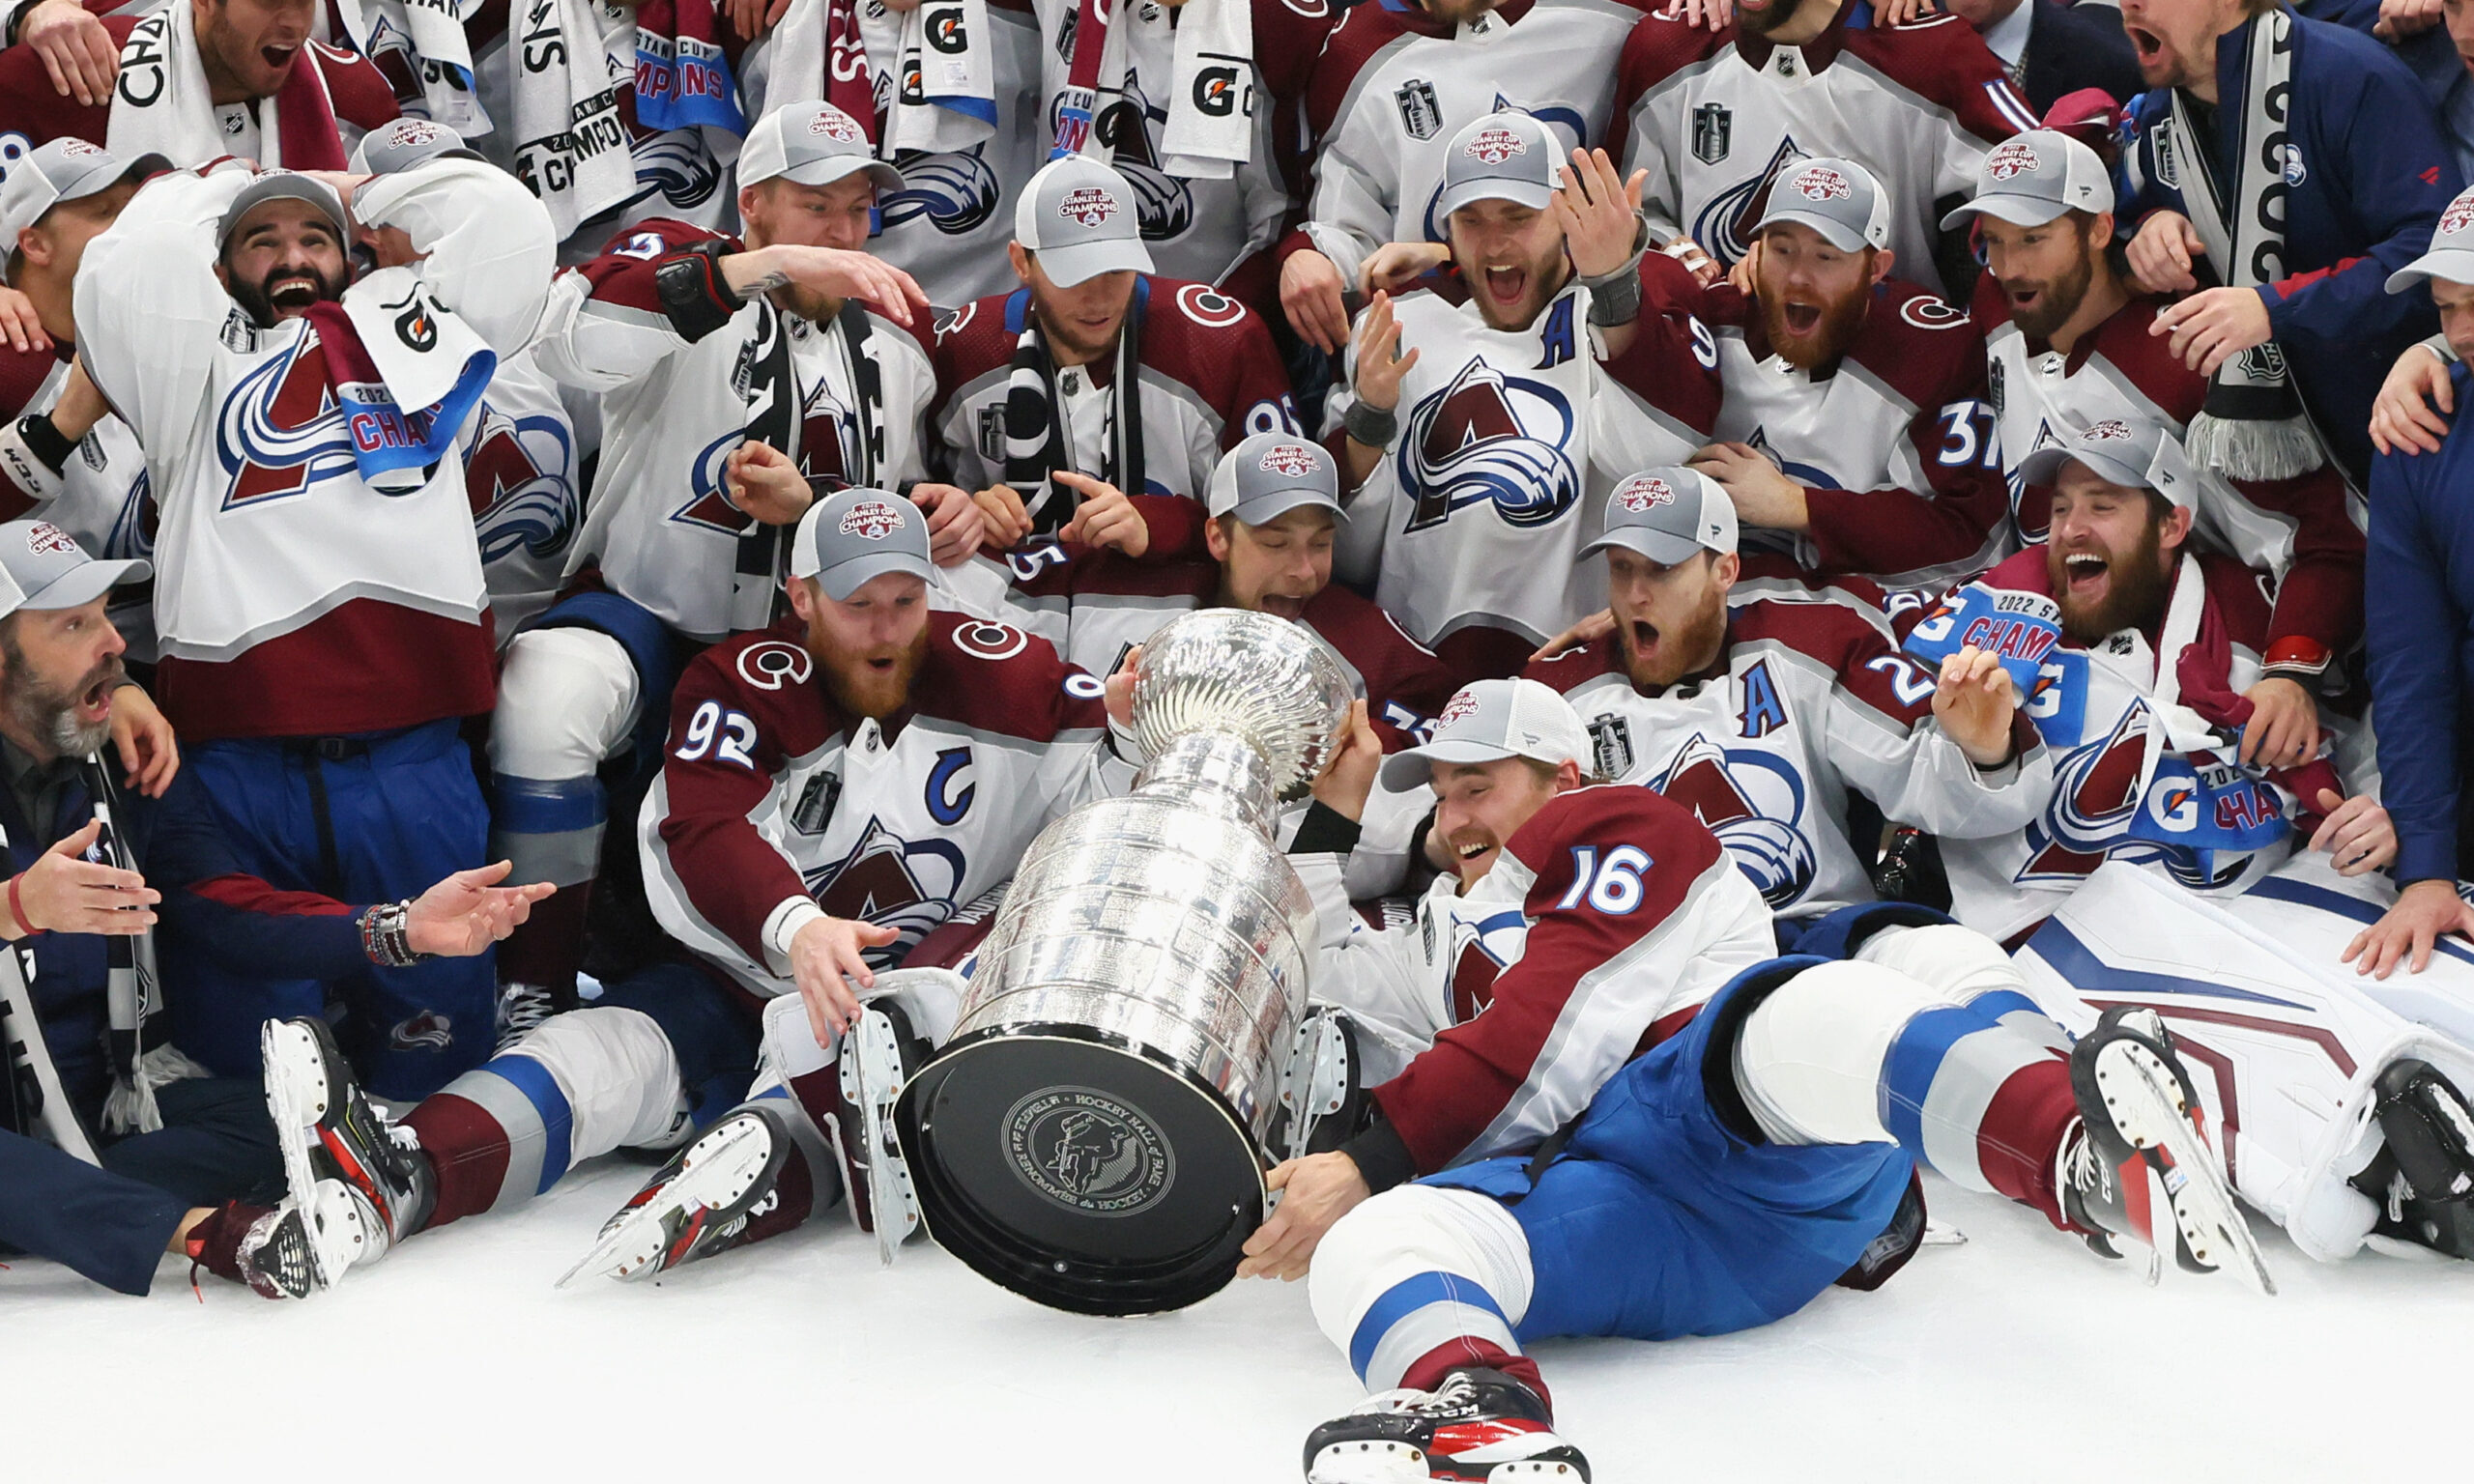 Colorado Avalanche win the Stanley Cup...